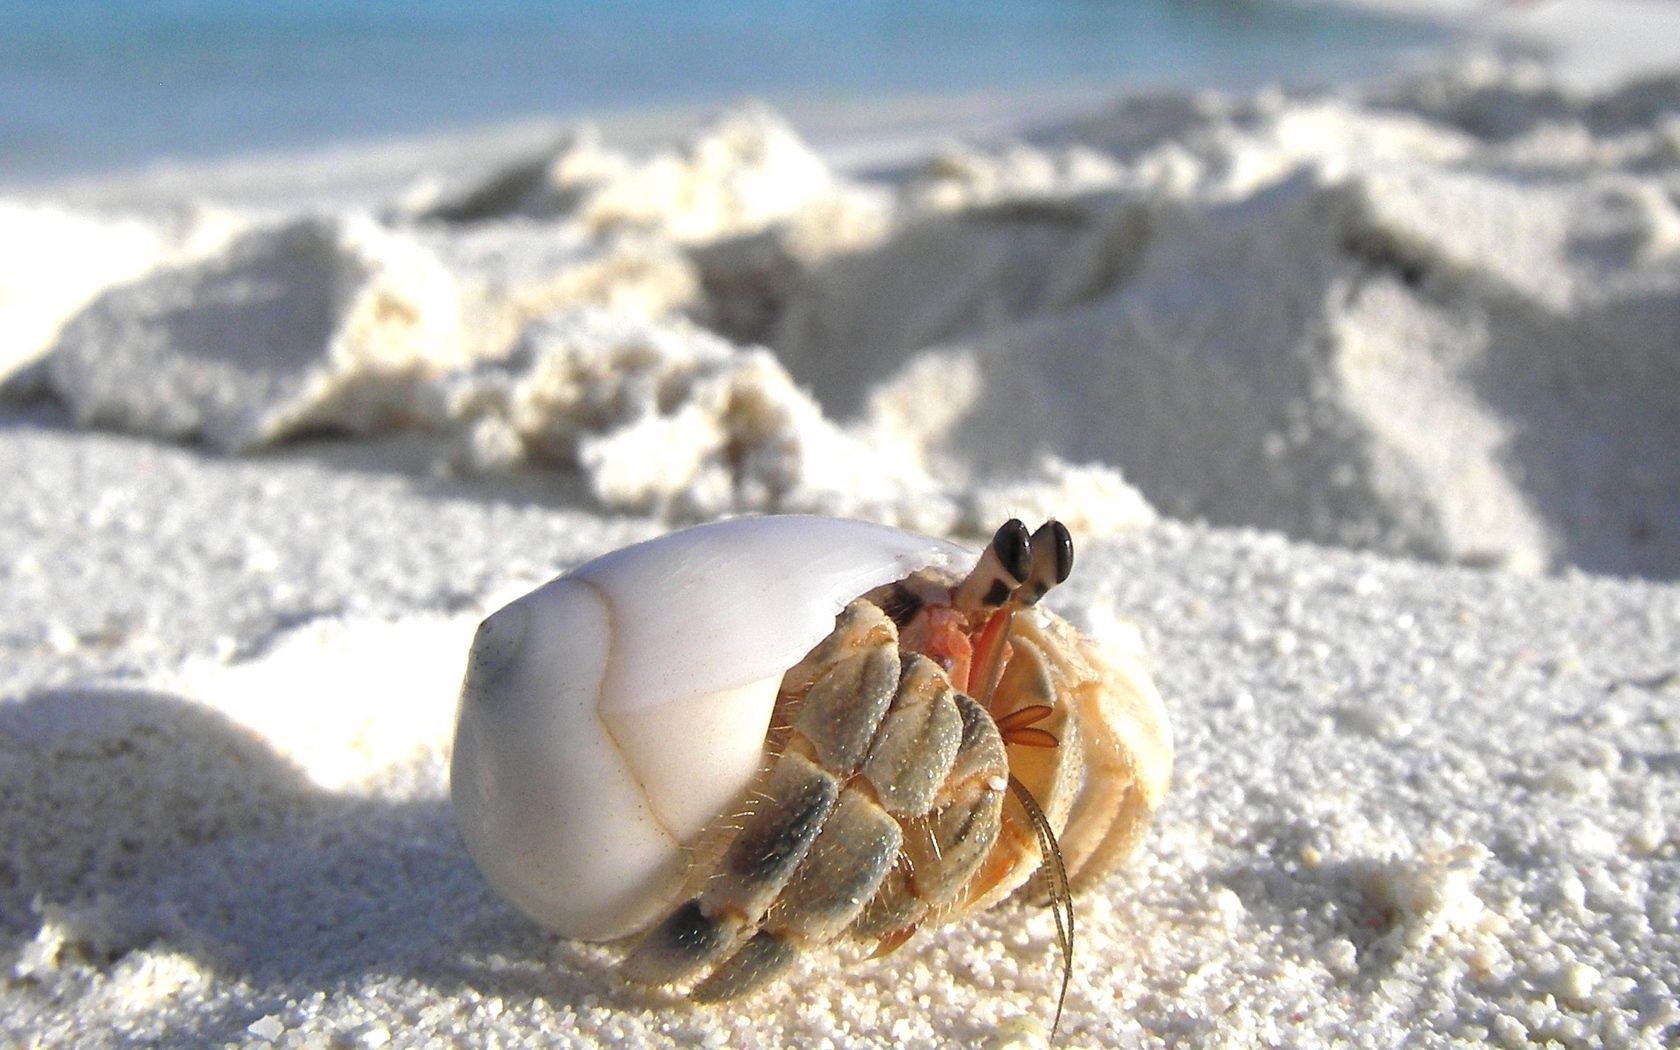 New Lock Screen Wallpapers animals, sand, macro, hide, crab, disappear